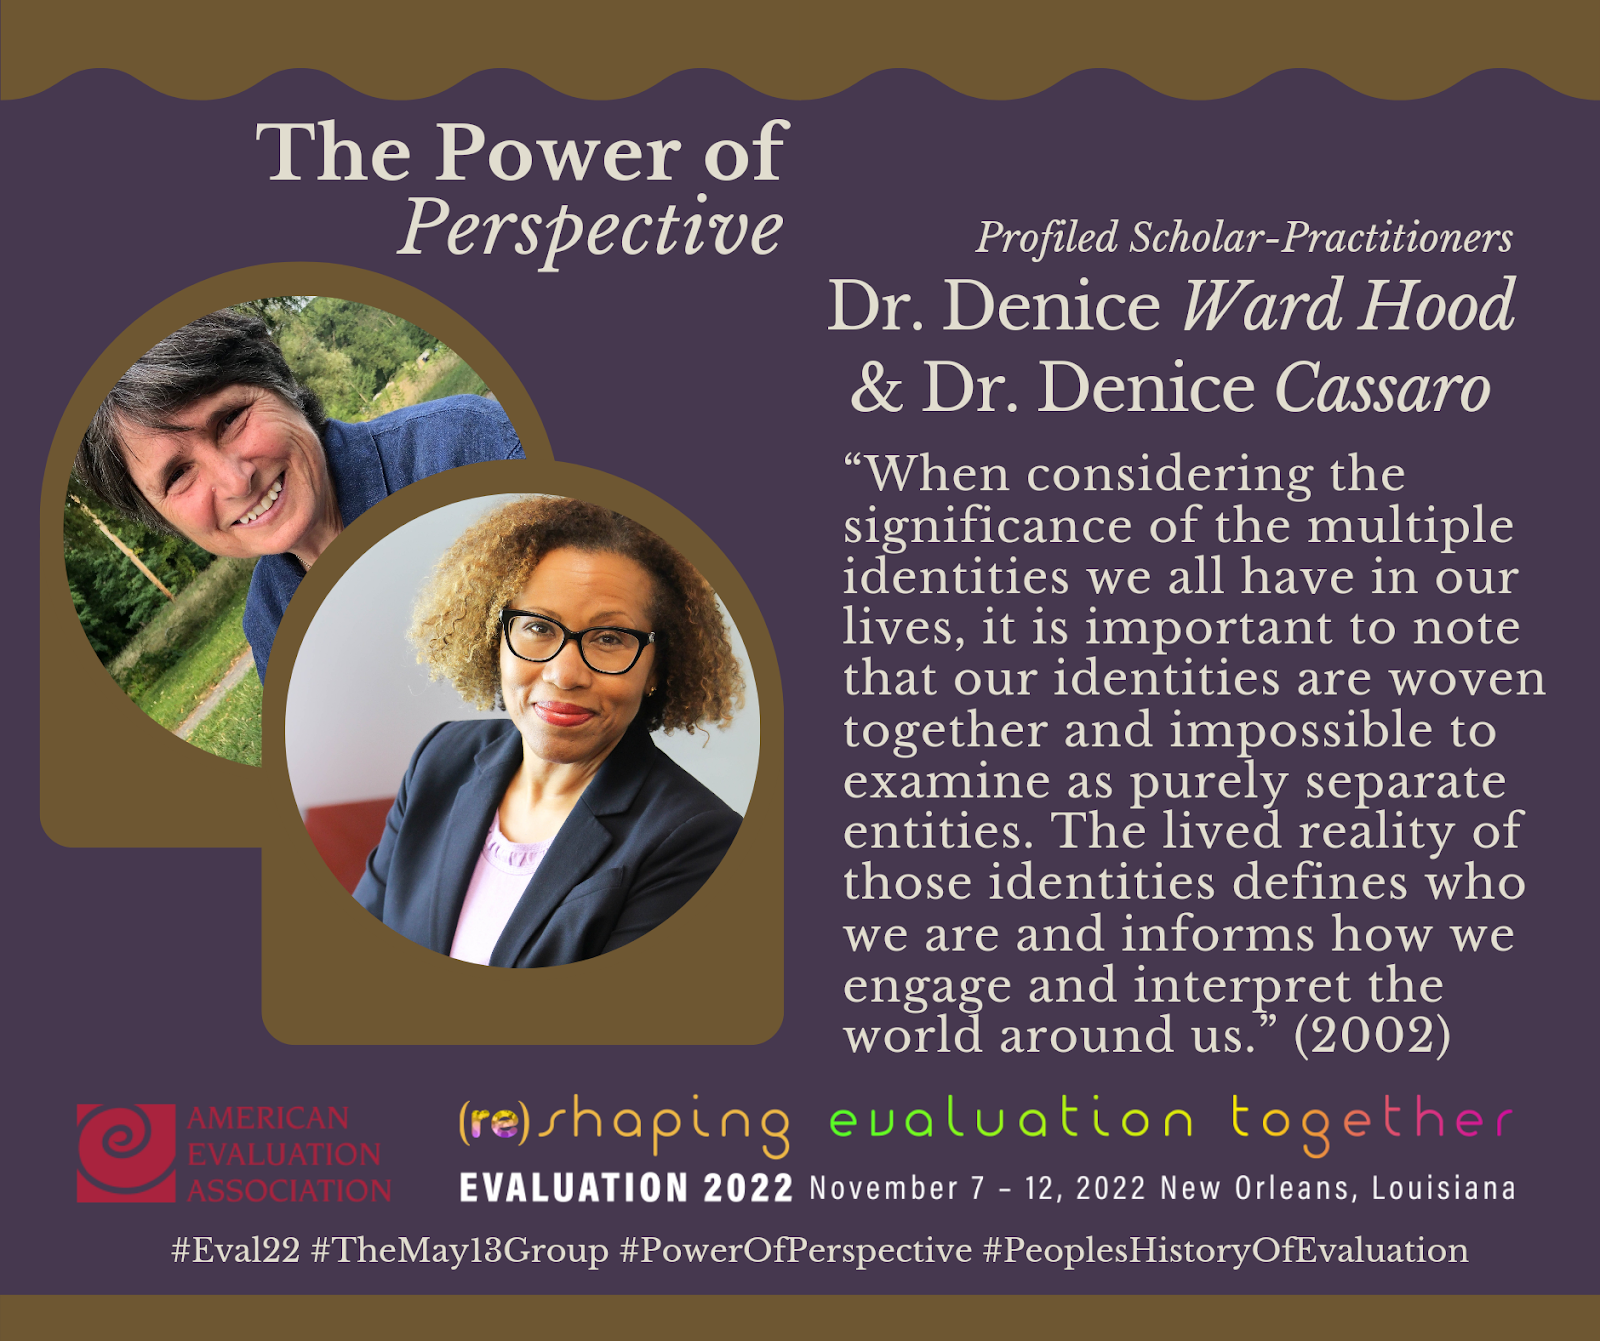 Profiled Scholar-Practitioners Dr. Denice Ward Hood and Dr. Denice Cassaro